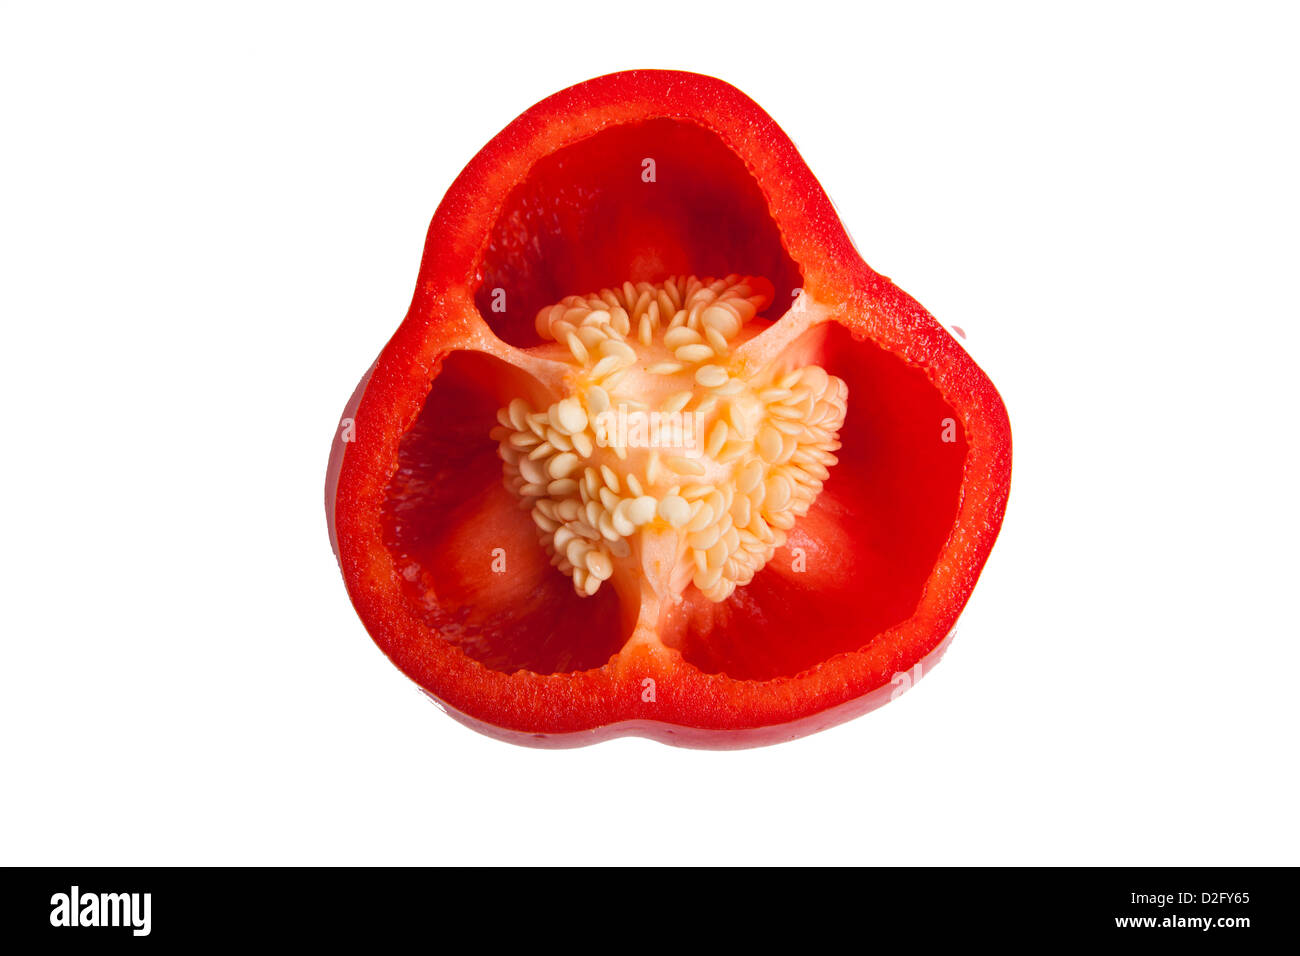 Close-up of cross section of red bell pepper Stock Photo